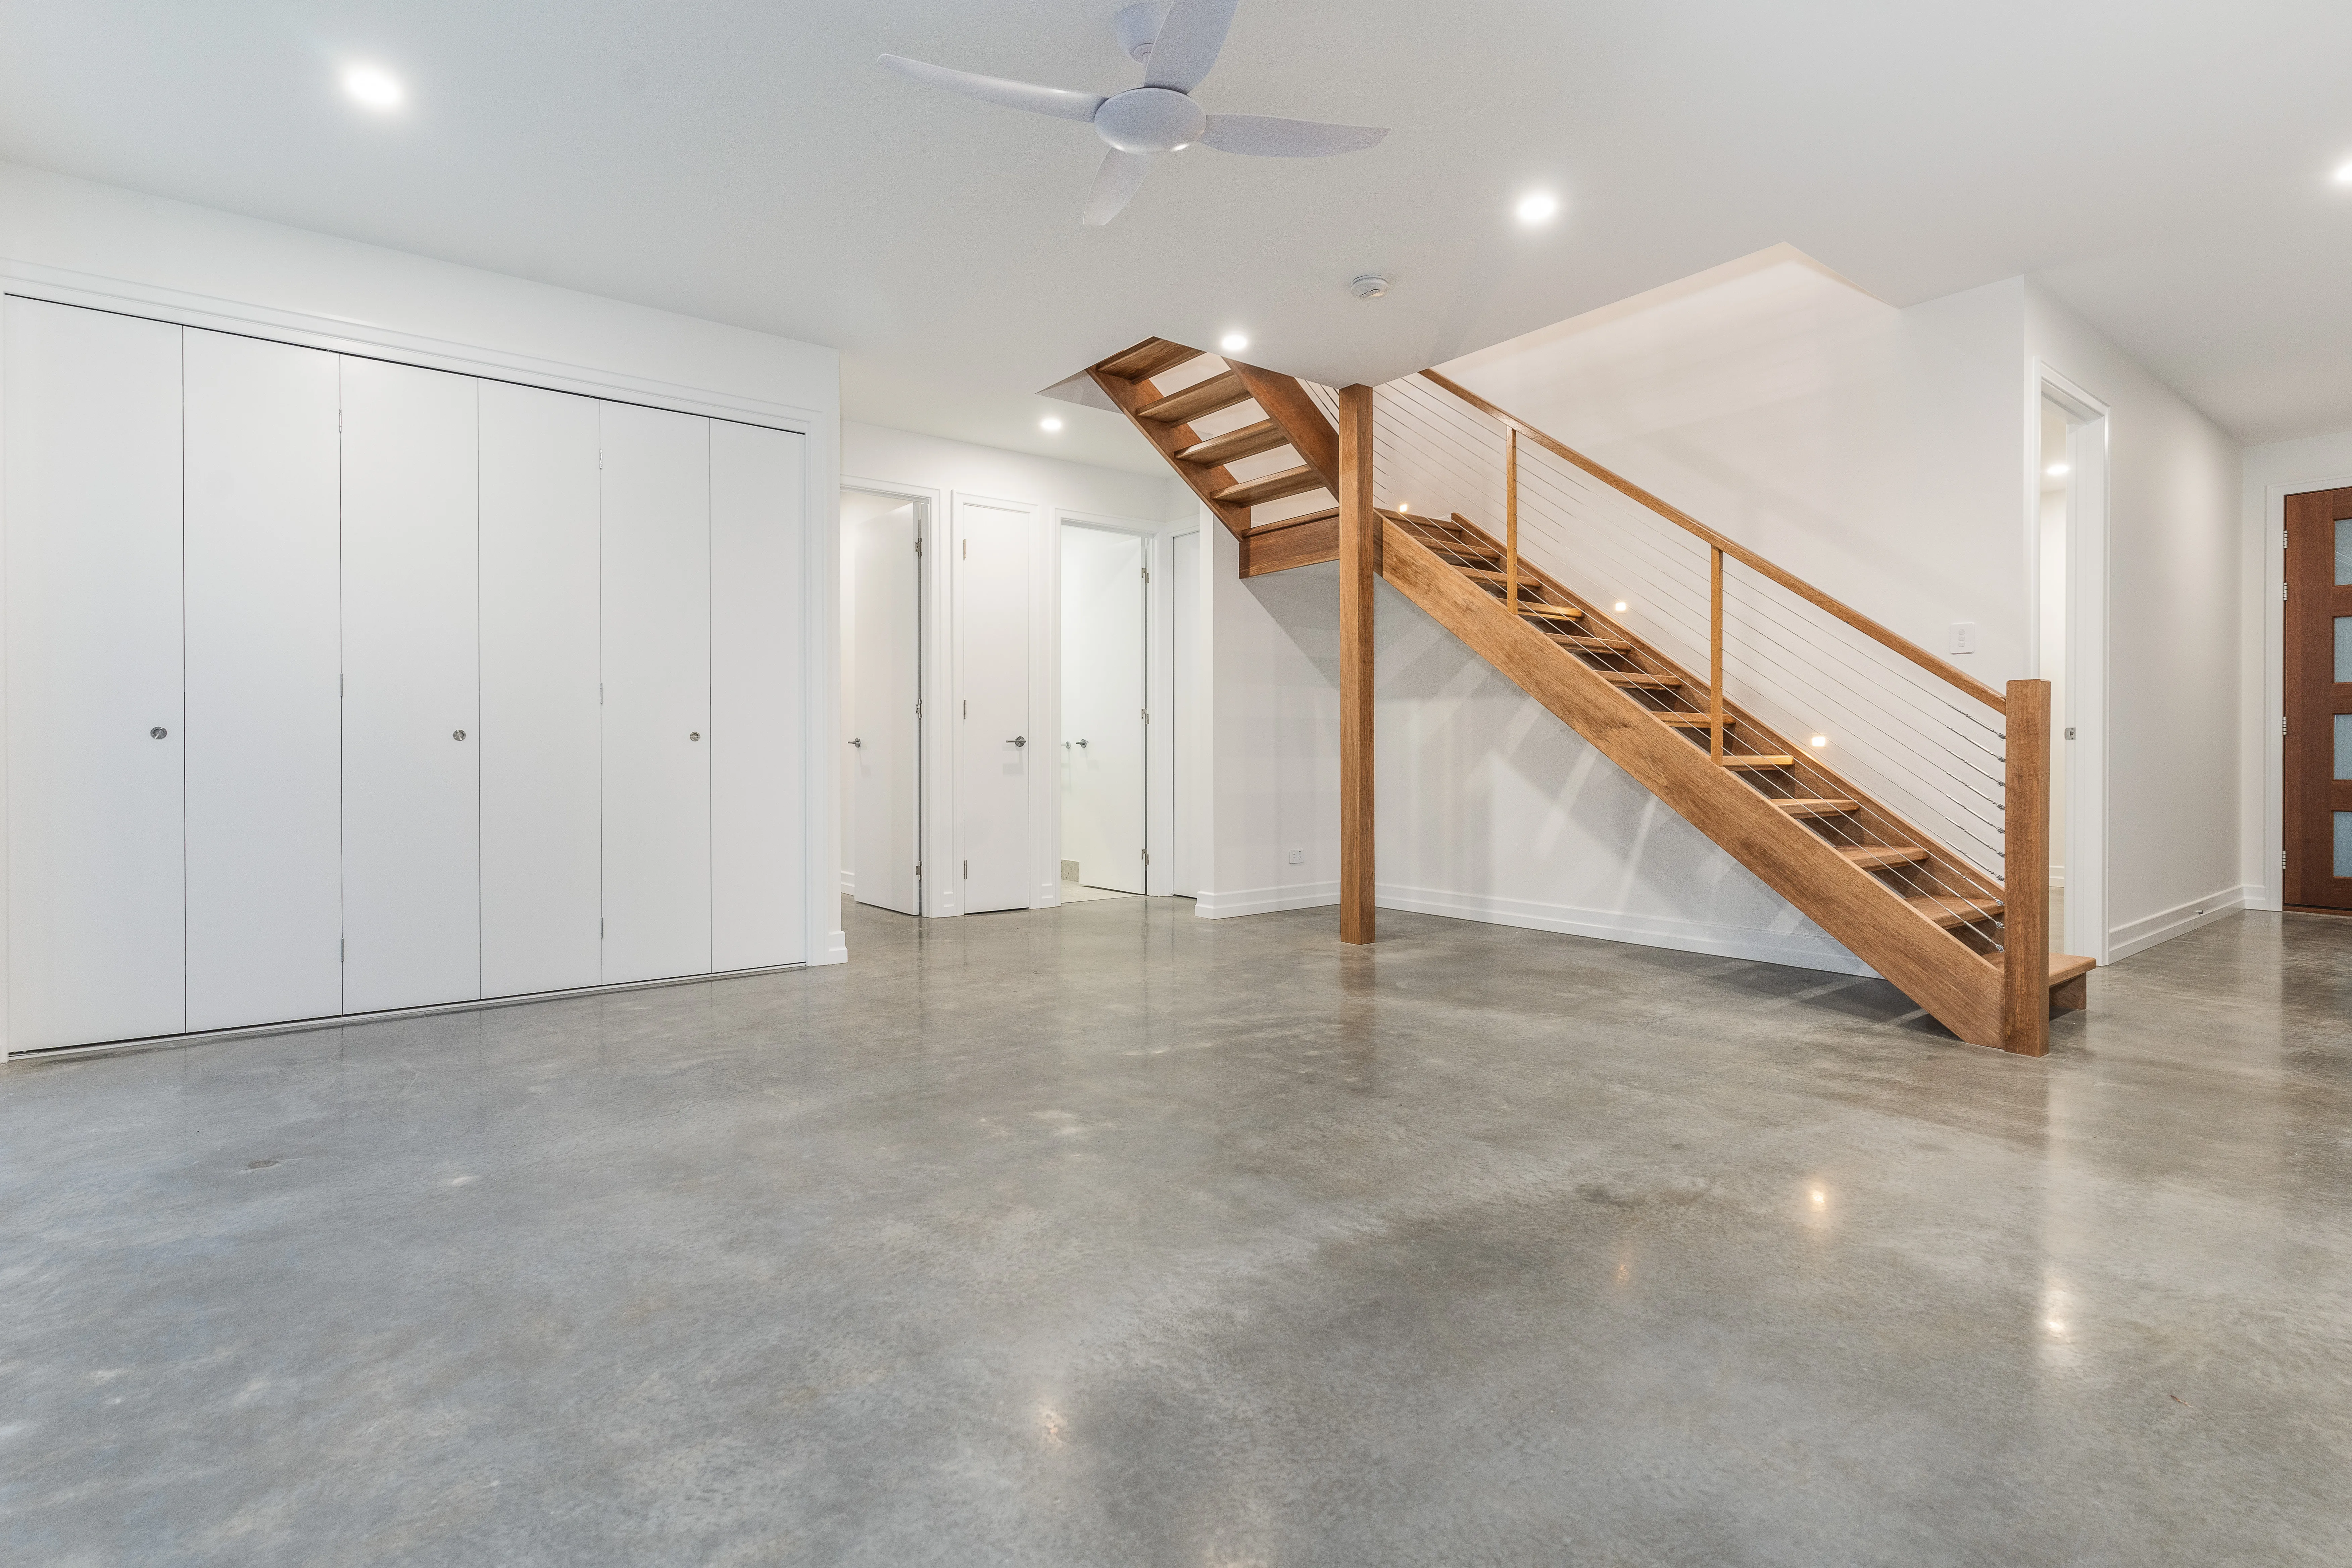 polished concrete floors-bifold doors-wire balustrade-timber handrail- timber stairs